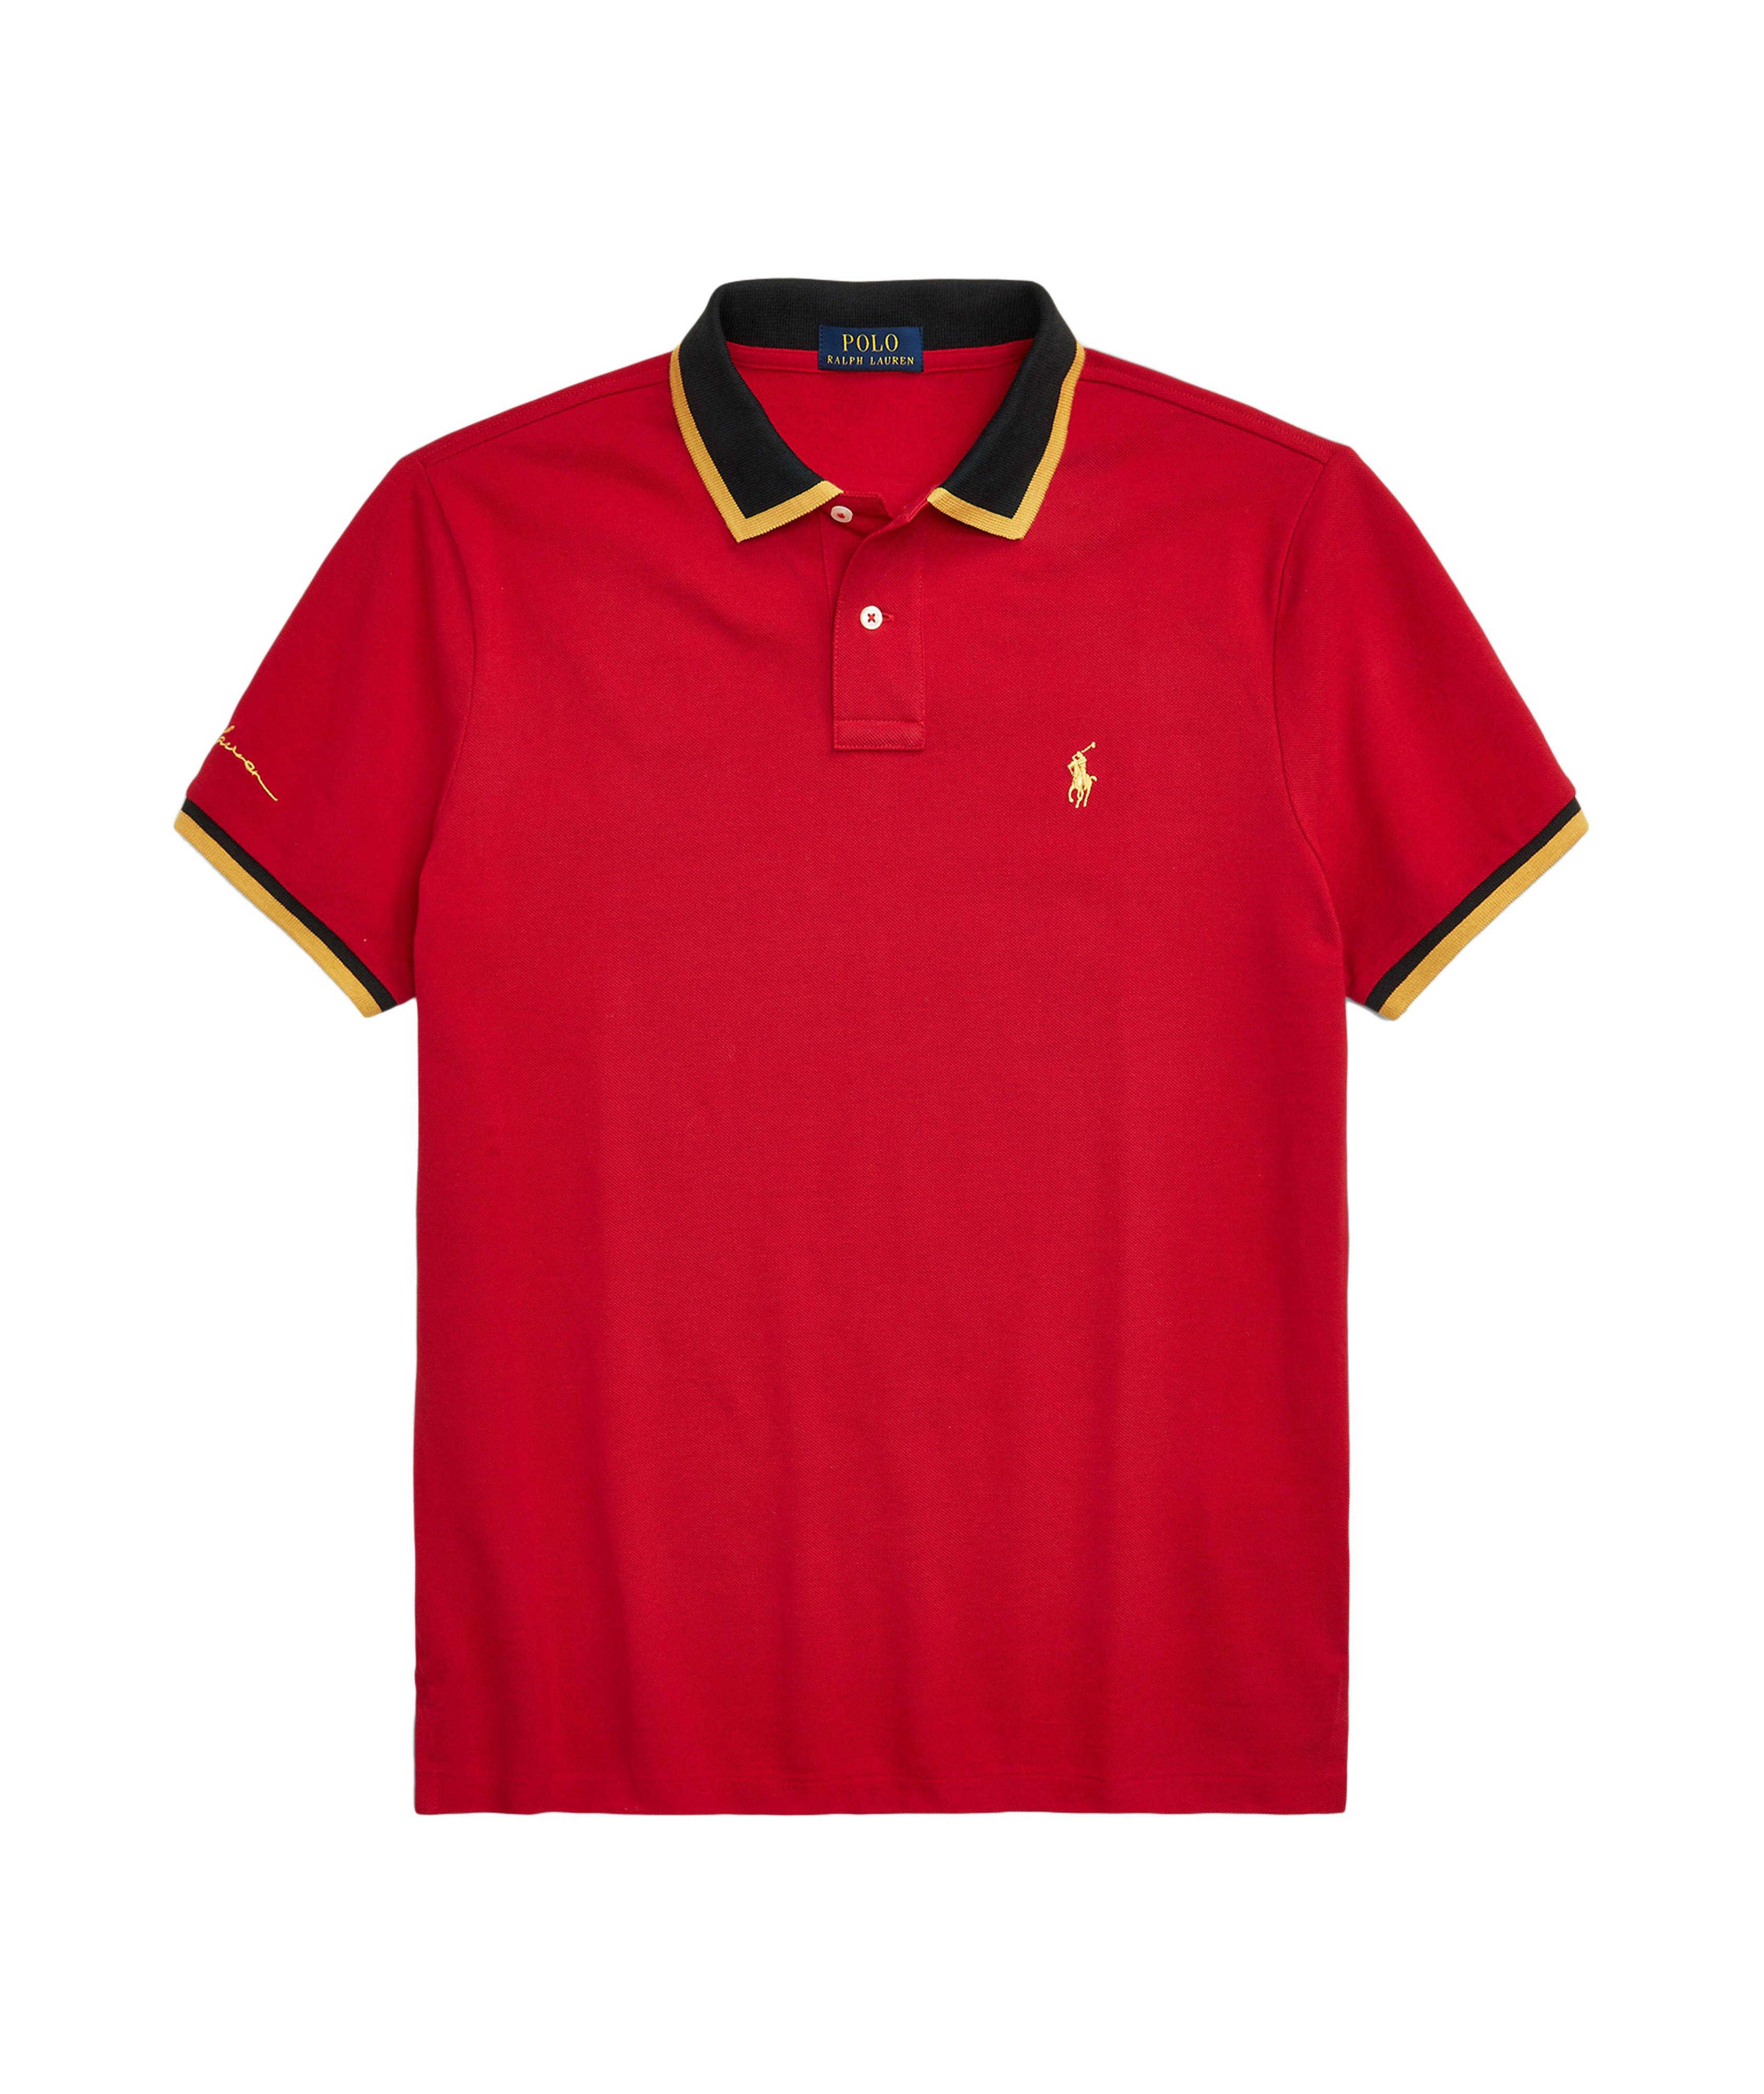 Slim Fit Lunar New Year Polo image 0